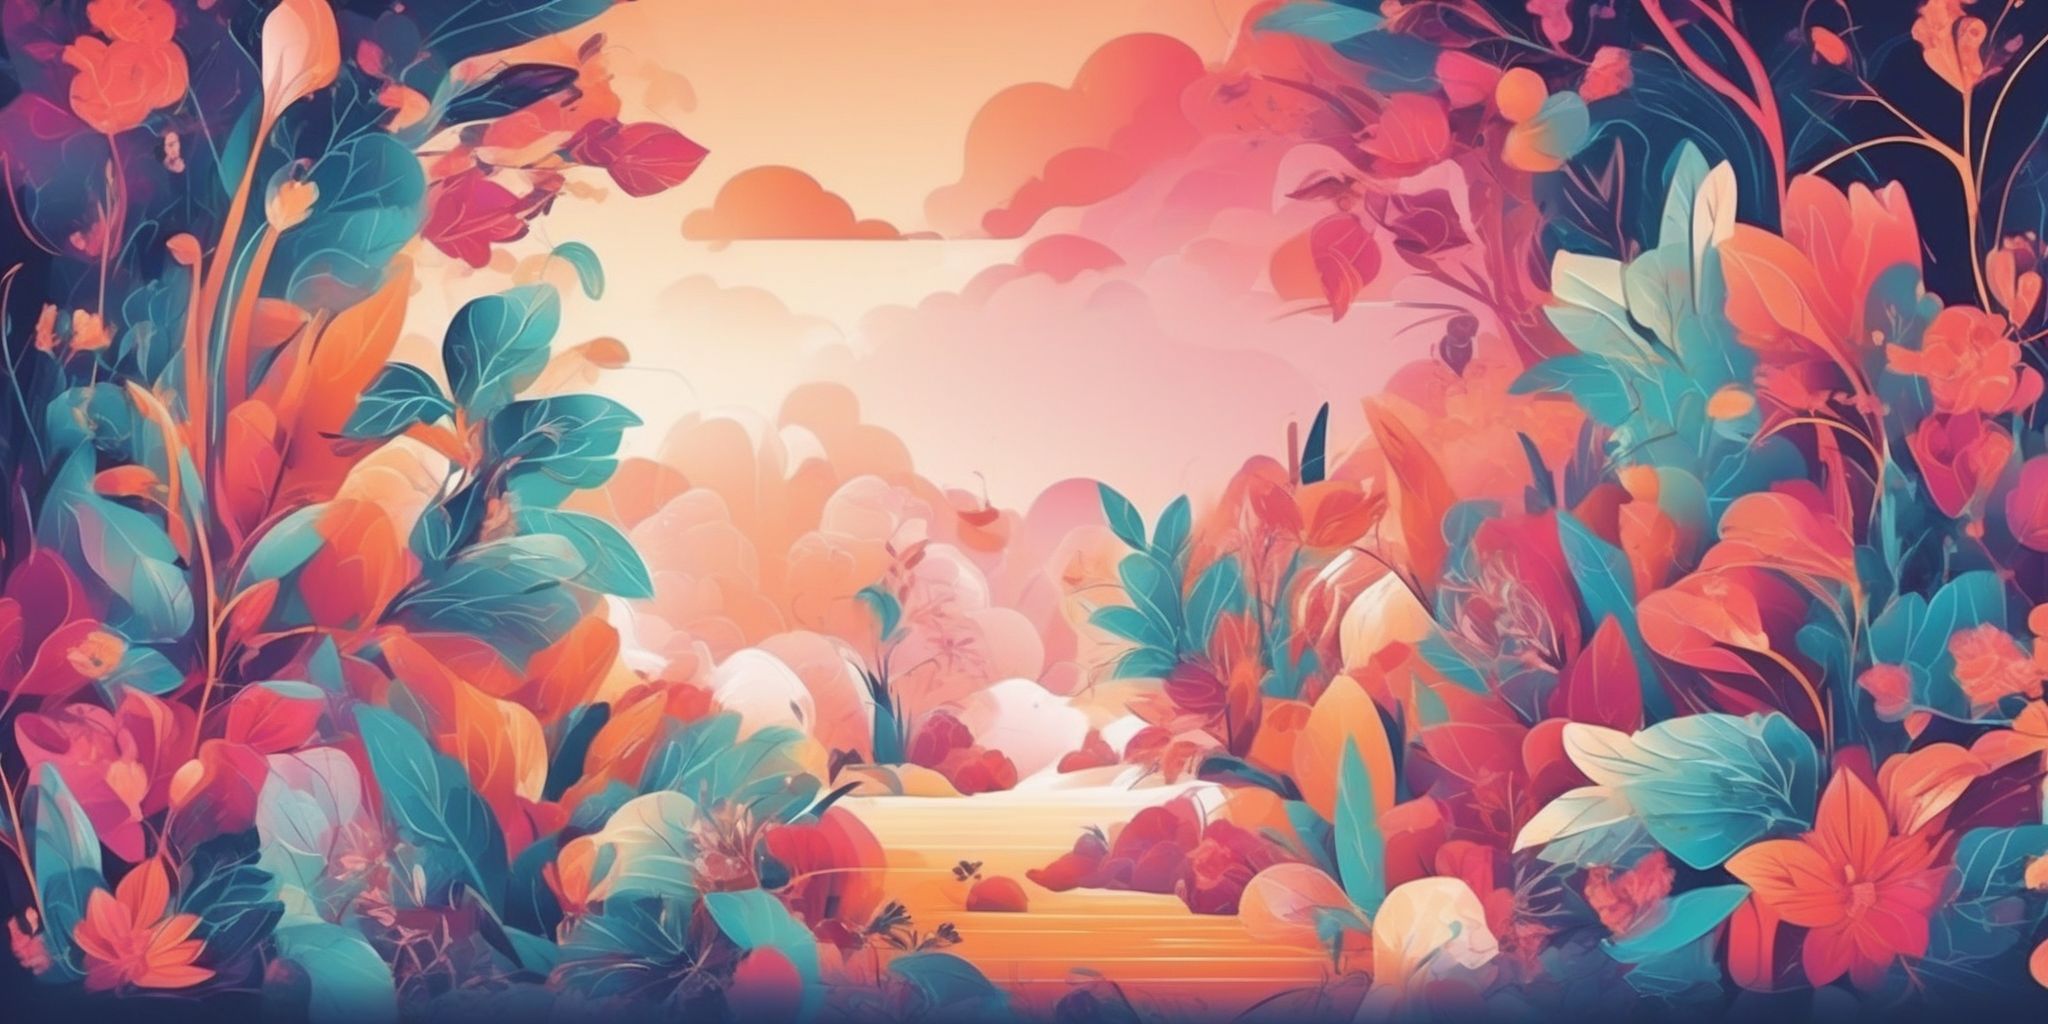 Engaging design in illustration style with gradients and white background